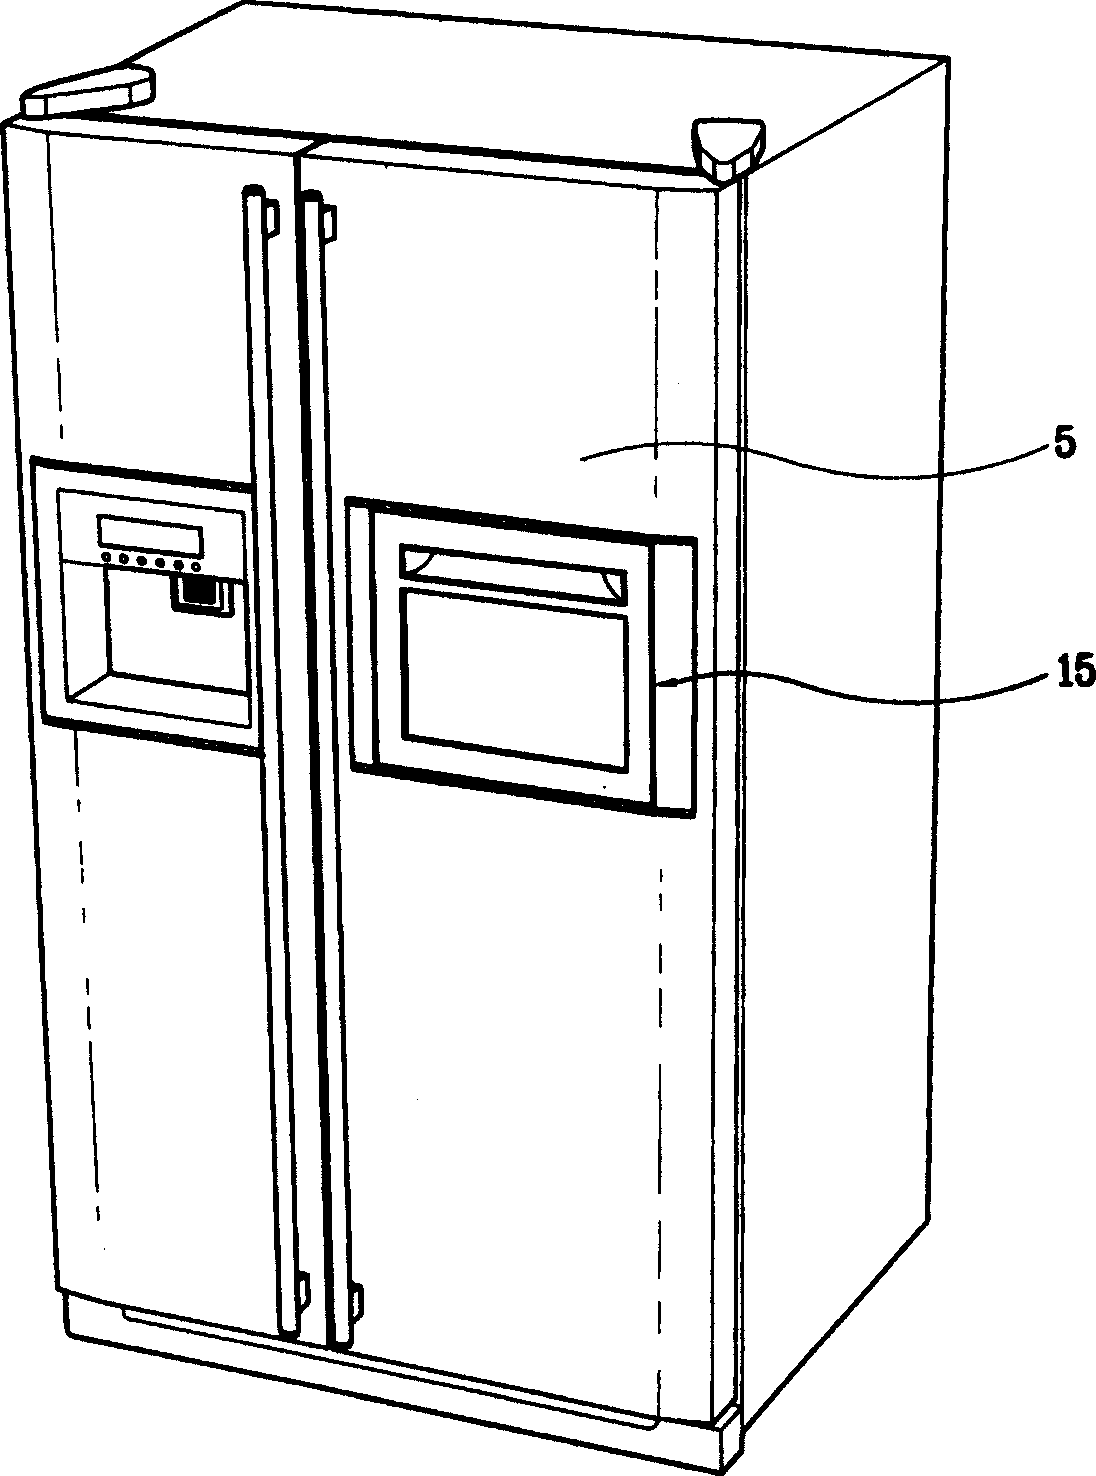 Electric refrigerator with display part